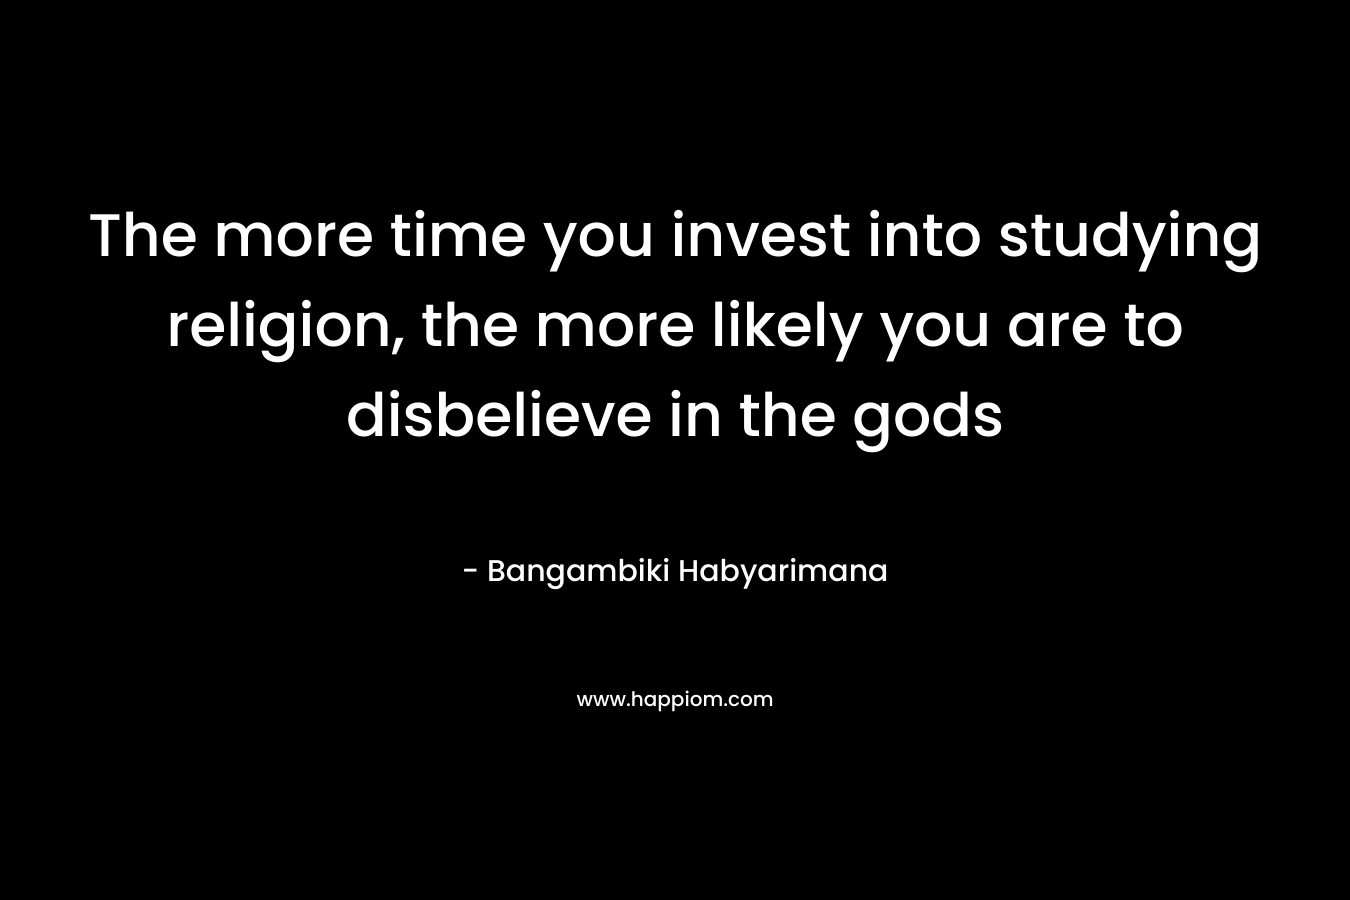 The more time you invest into studying religion, the more likely you are to disbelieve in the gods